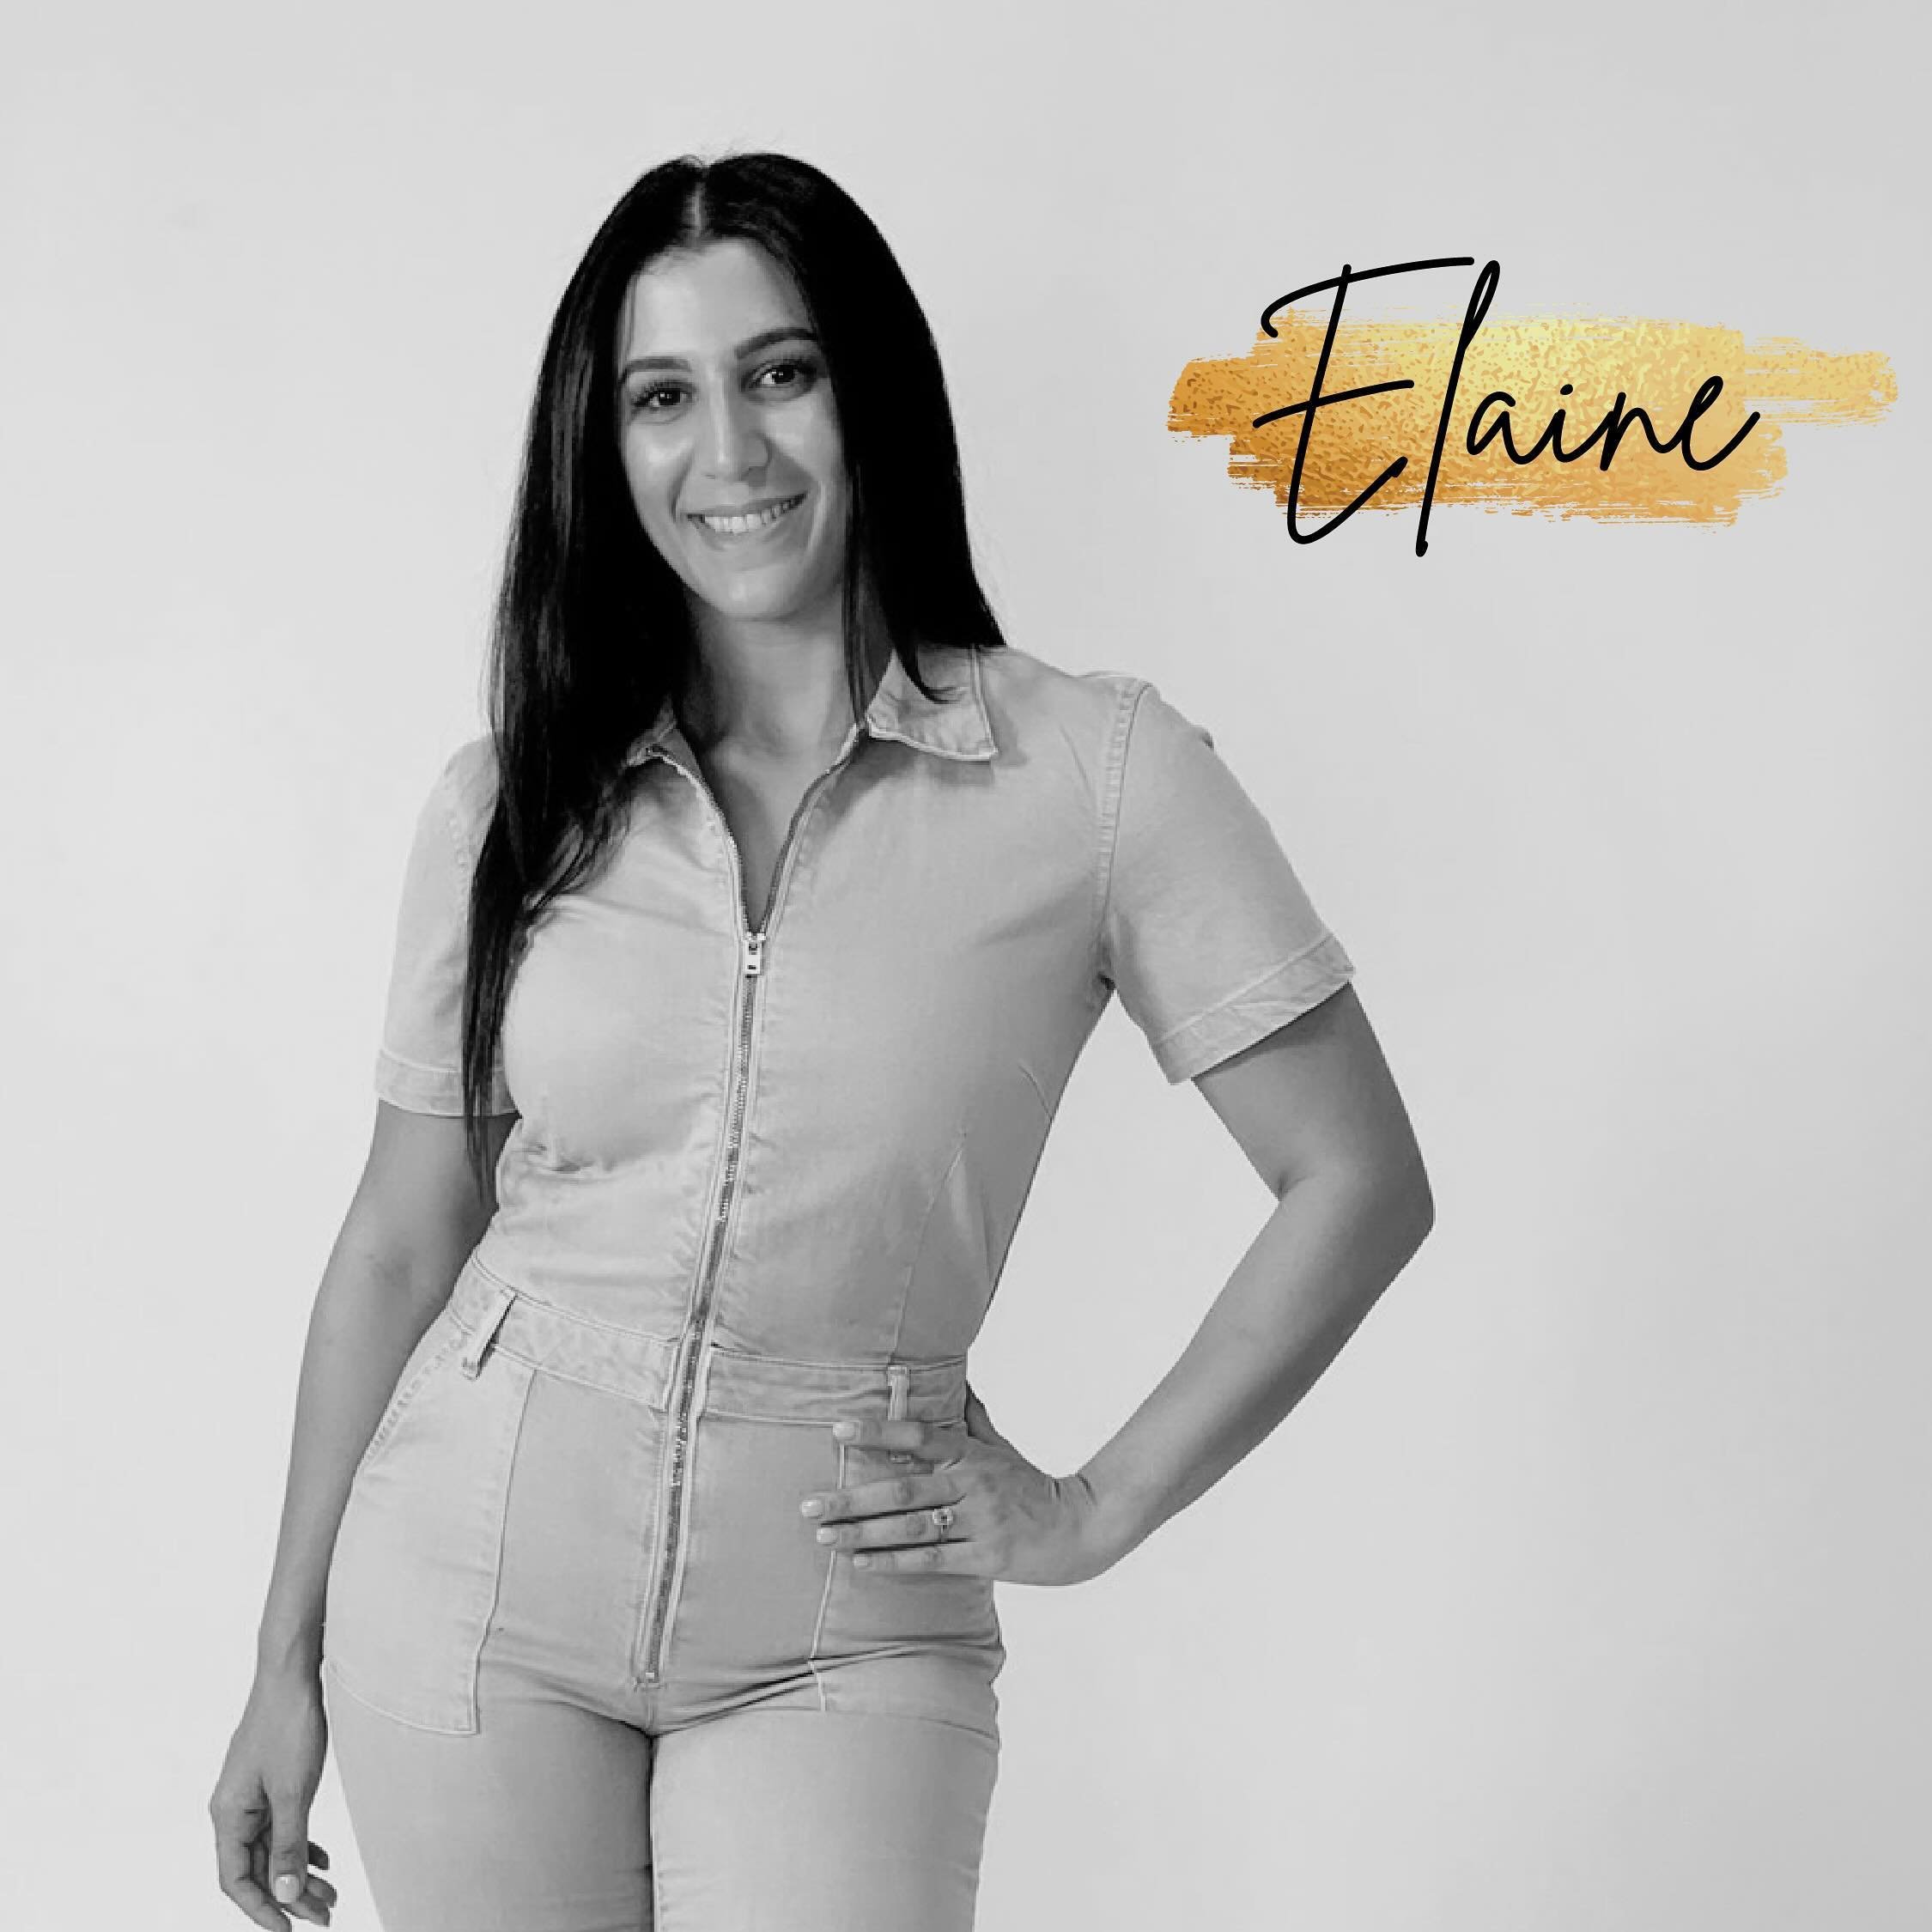 Say hello 👋🏽 and welcome to our new STAR Events Associates! 
Drum roll please 🥁 
This is Elaine Awad! 💫 

With 10 years of event management experience, Elaine is an energetic and enthusiastic team member who loves to hit the dancefloor. With a ba